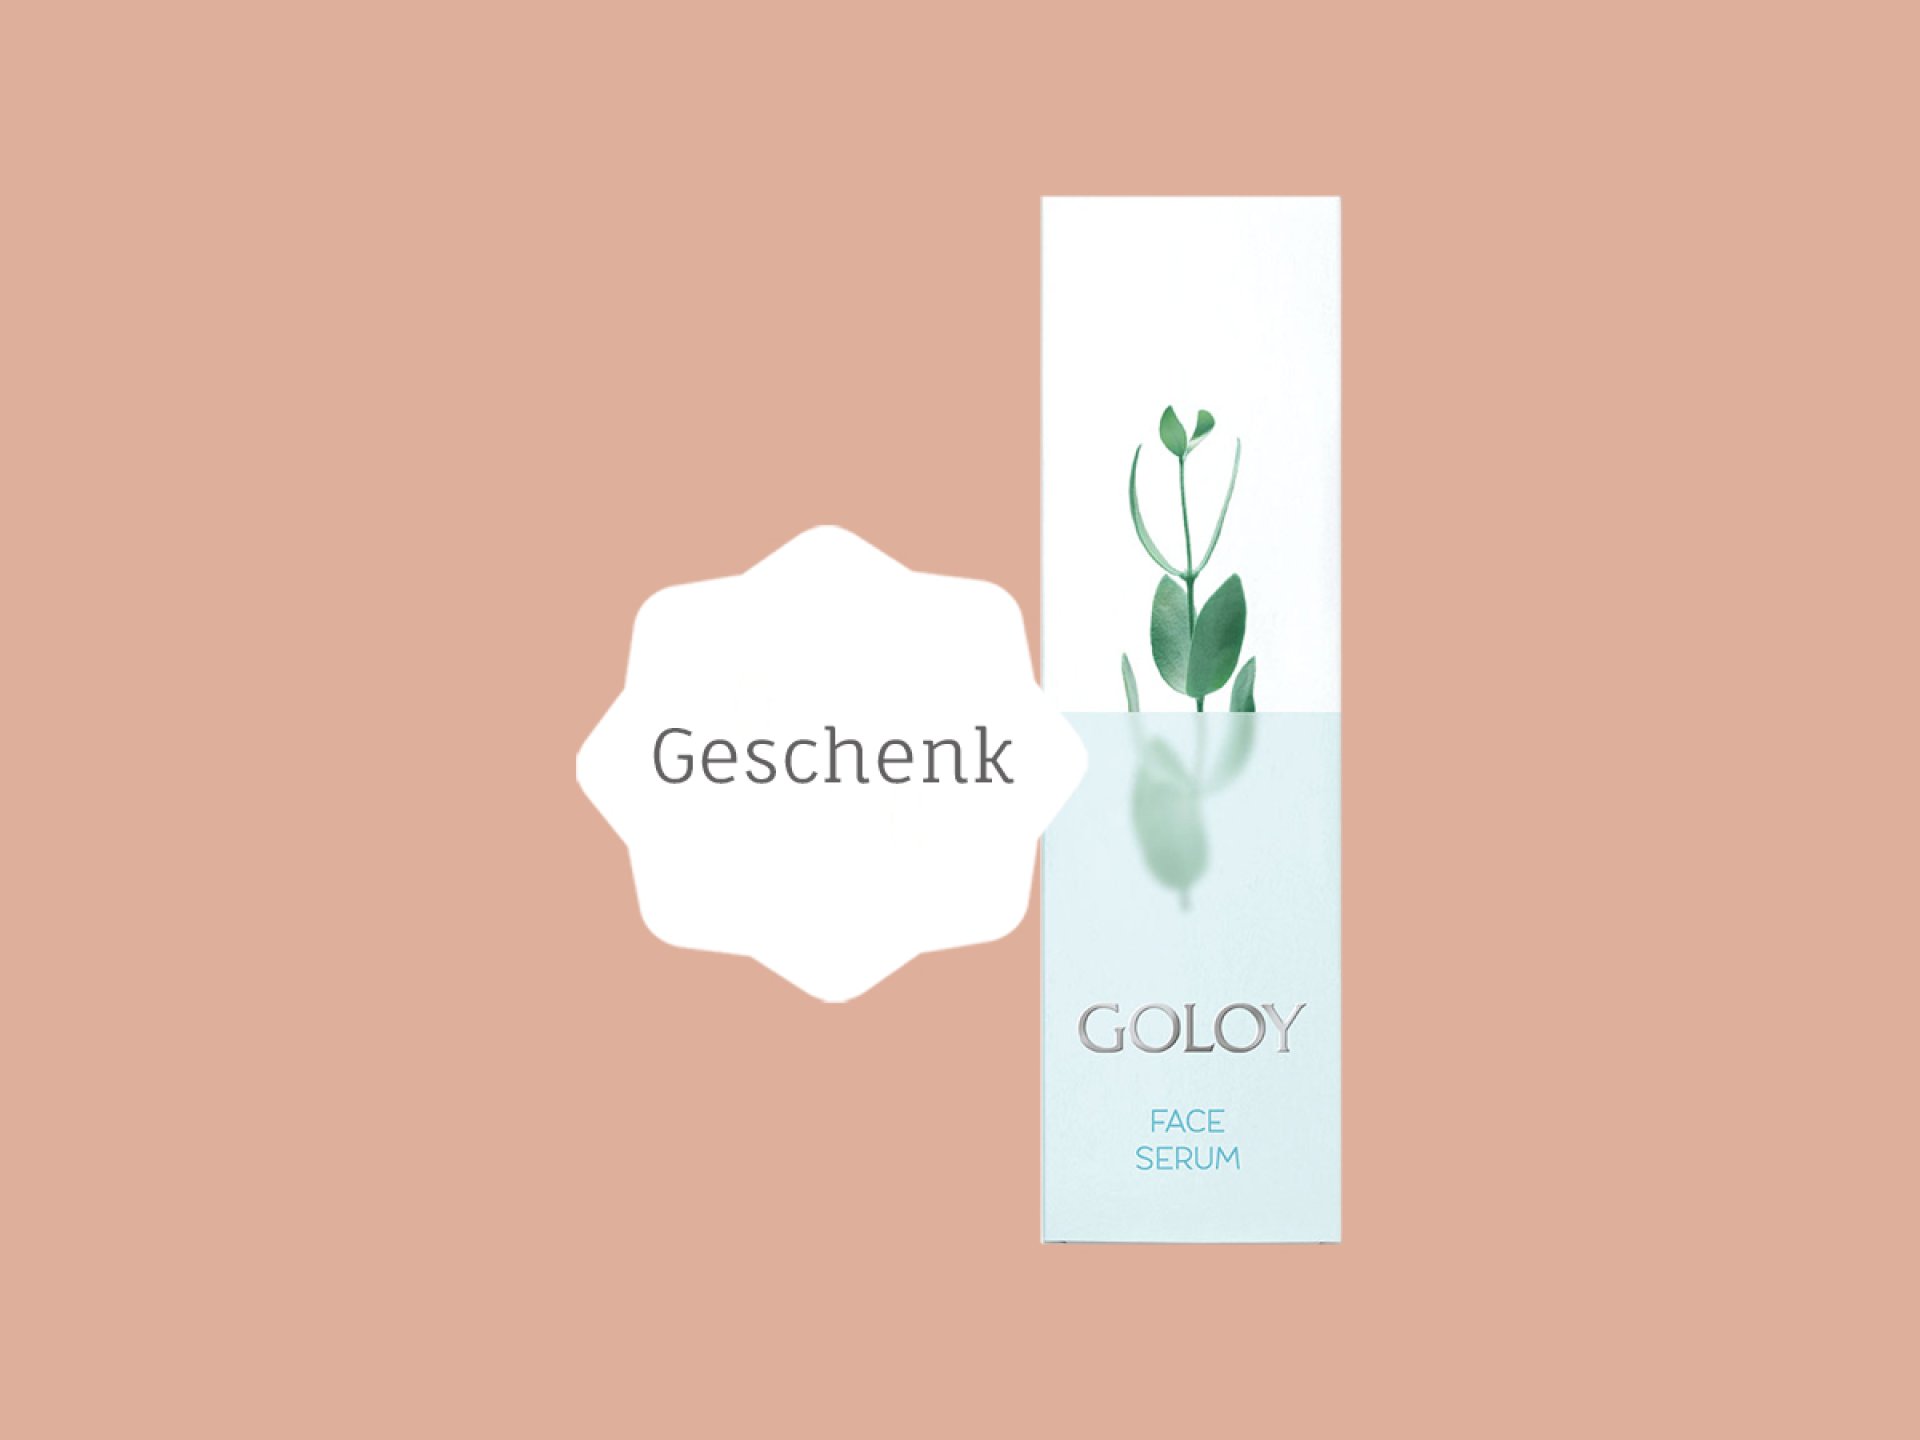 Give Away Goloy Serum